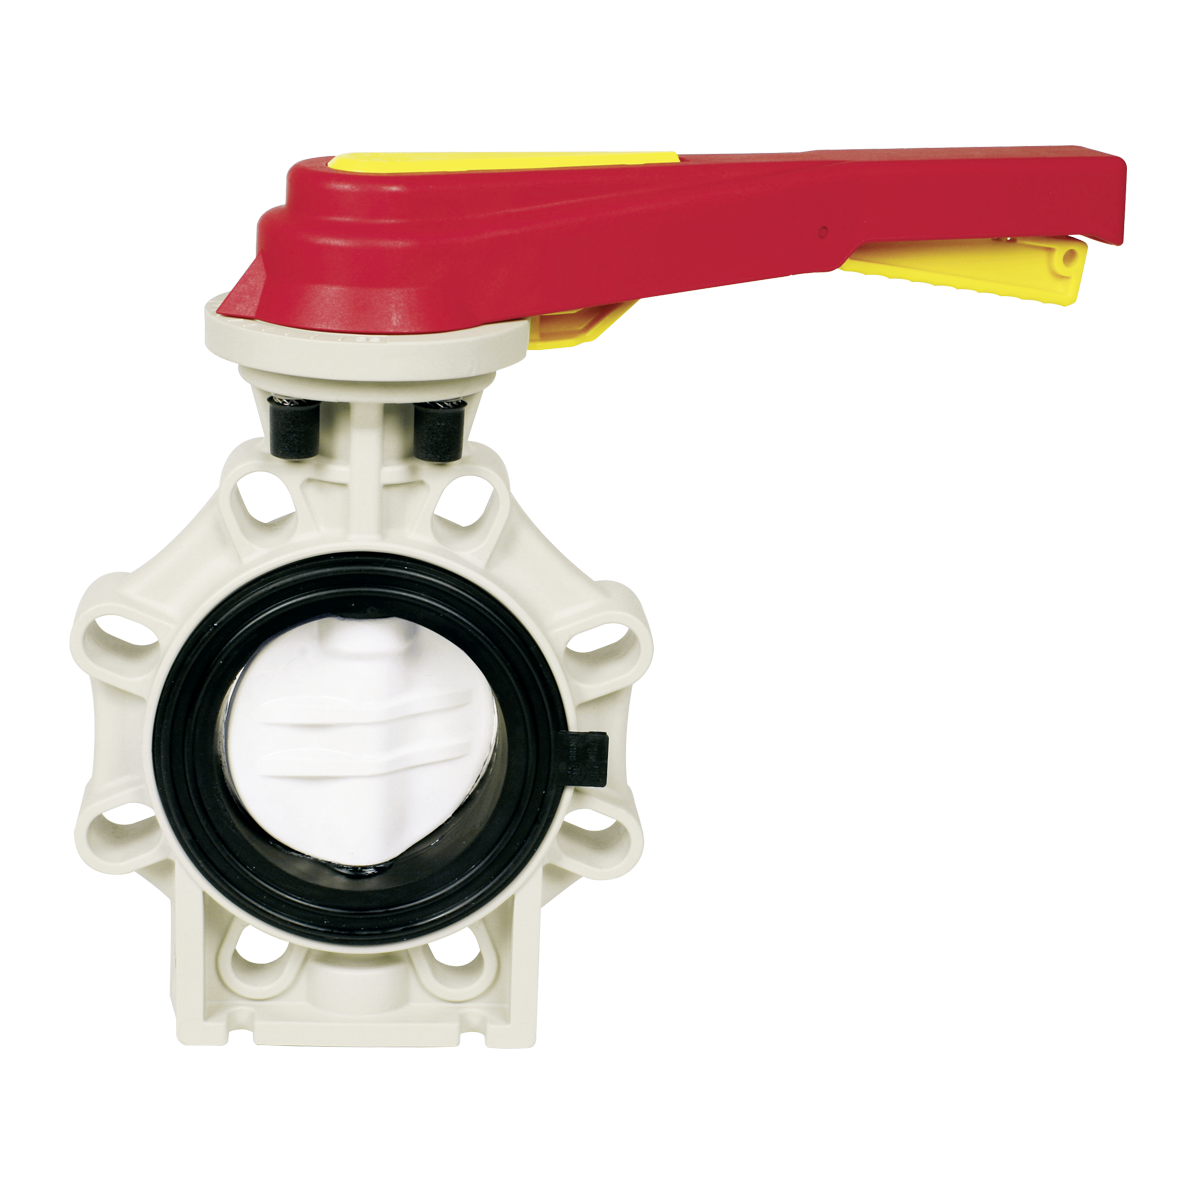 Praher K4 Series Butterfly Valve w/lever op (wafer style)